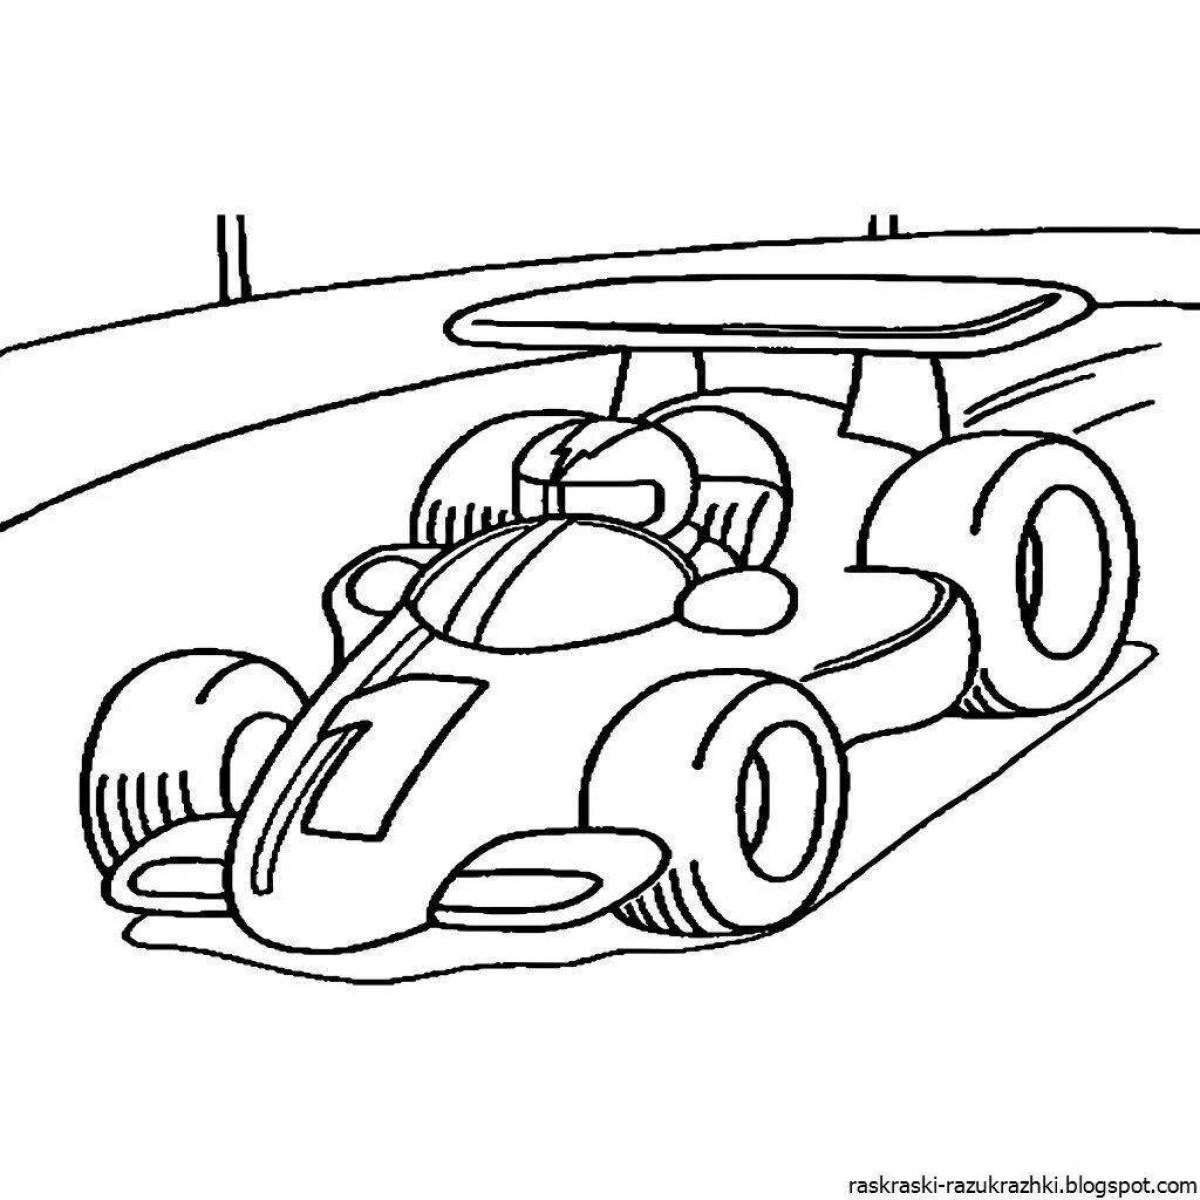 Outstanding racing car coloring book for 6-7 year olds